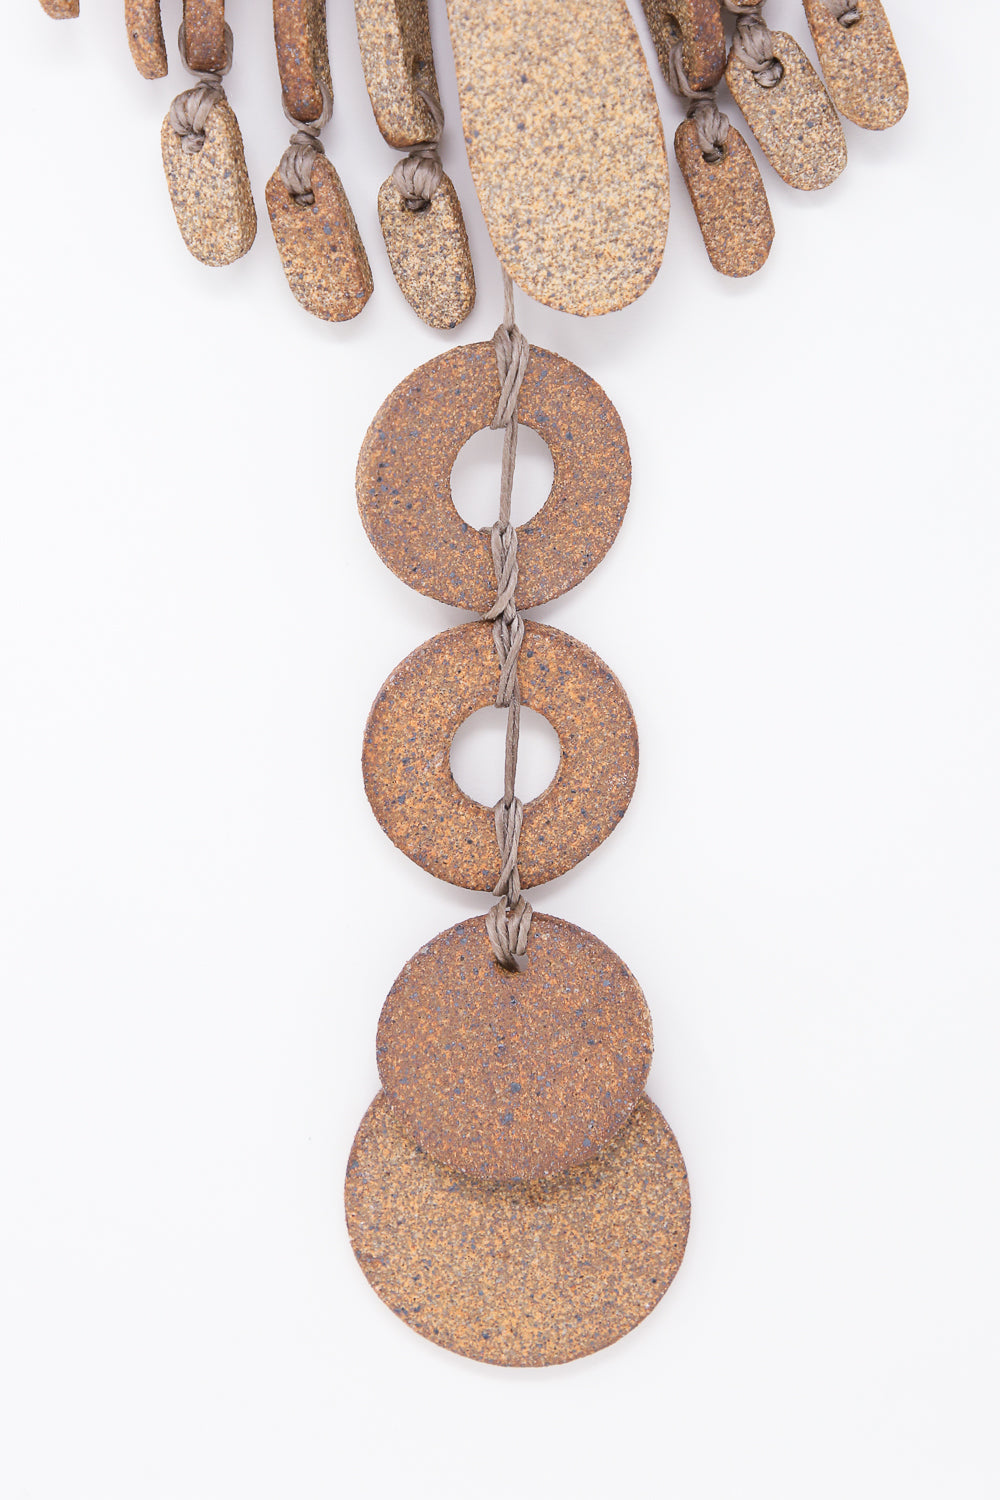 Heather Levine Wall Hanging - Teardrops With Circles in Mixed Brown detail